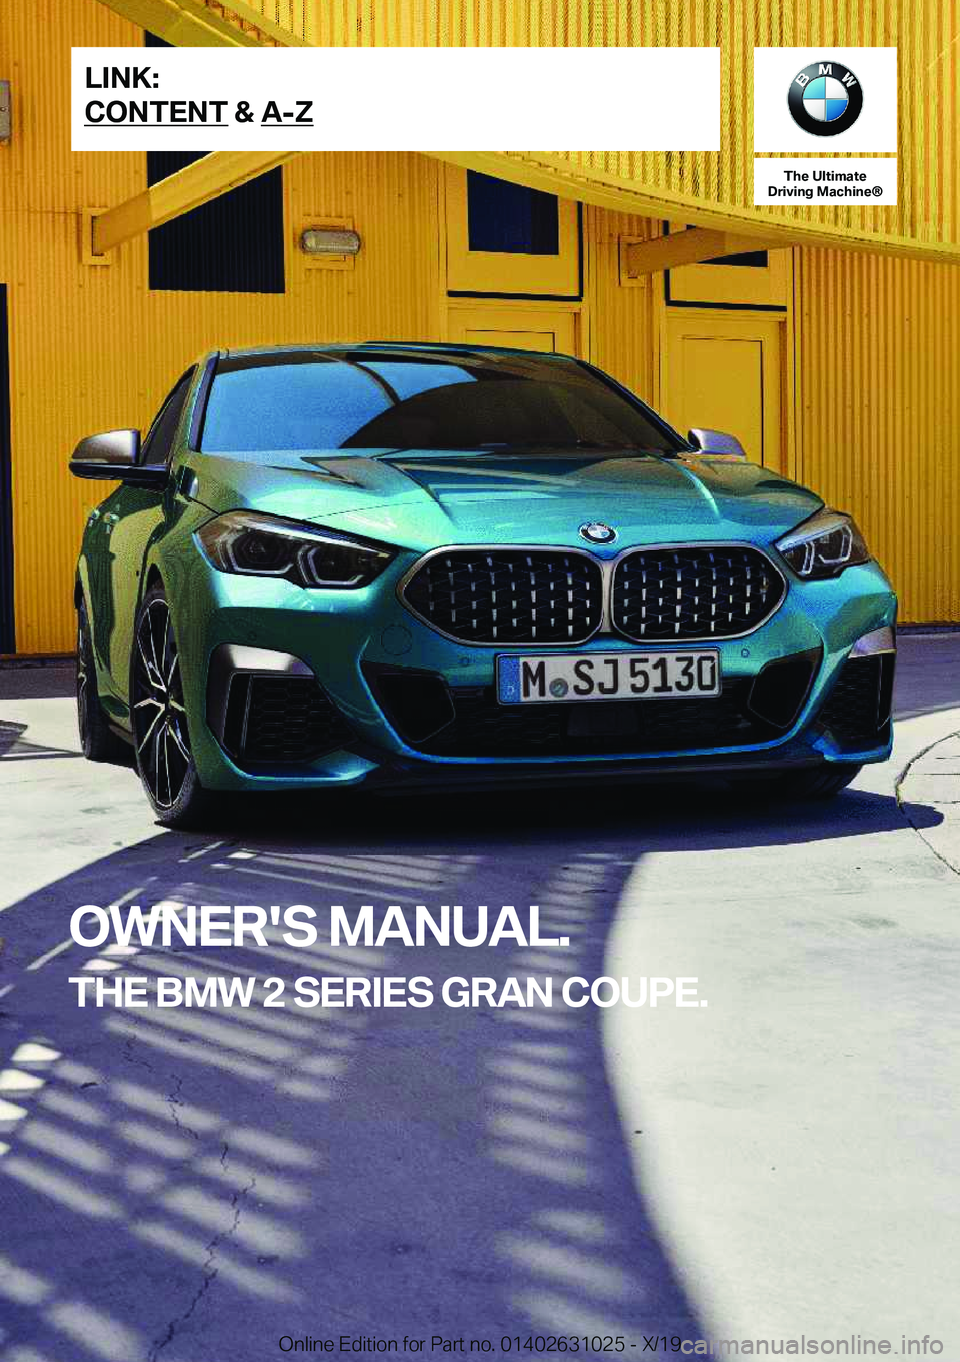 BMW 2 SERIES GRAN COUPE 2020  Owners Manual �T�h�e��U�l�t�i�m�a�t�e
�D�r�i�v�i�n�g��M�a�c�h�i�n�e�n
�O�W�N�E�R�'�S��M�A�N�U�A�L�.
�T�H�E��B�M�W��2��S�E�R�I�E�S��G�R�A�N��C�O�U�P�E�.�L�I�N�K�:
�C�O�N�T�E�N�T��&��A�-�Z�O�n�l�i�n�e�